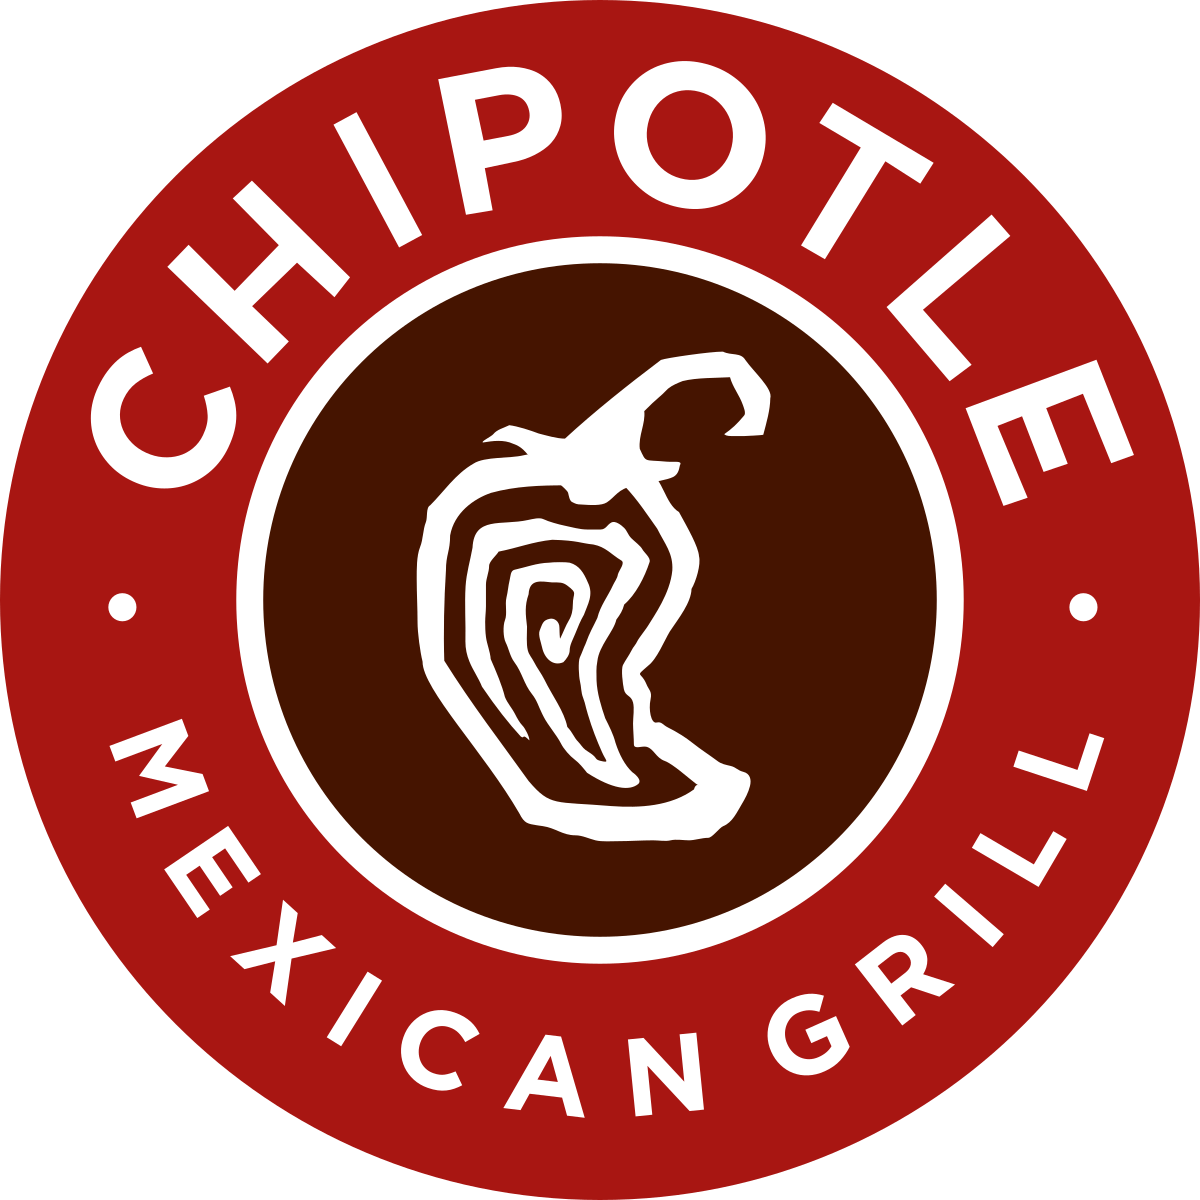 Mexi Logo - Chipotle Mexican Grill